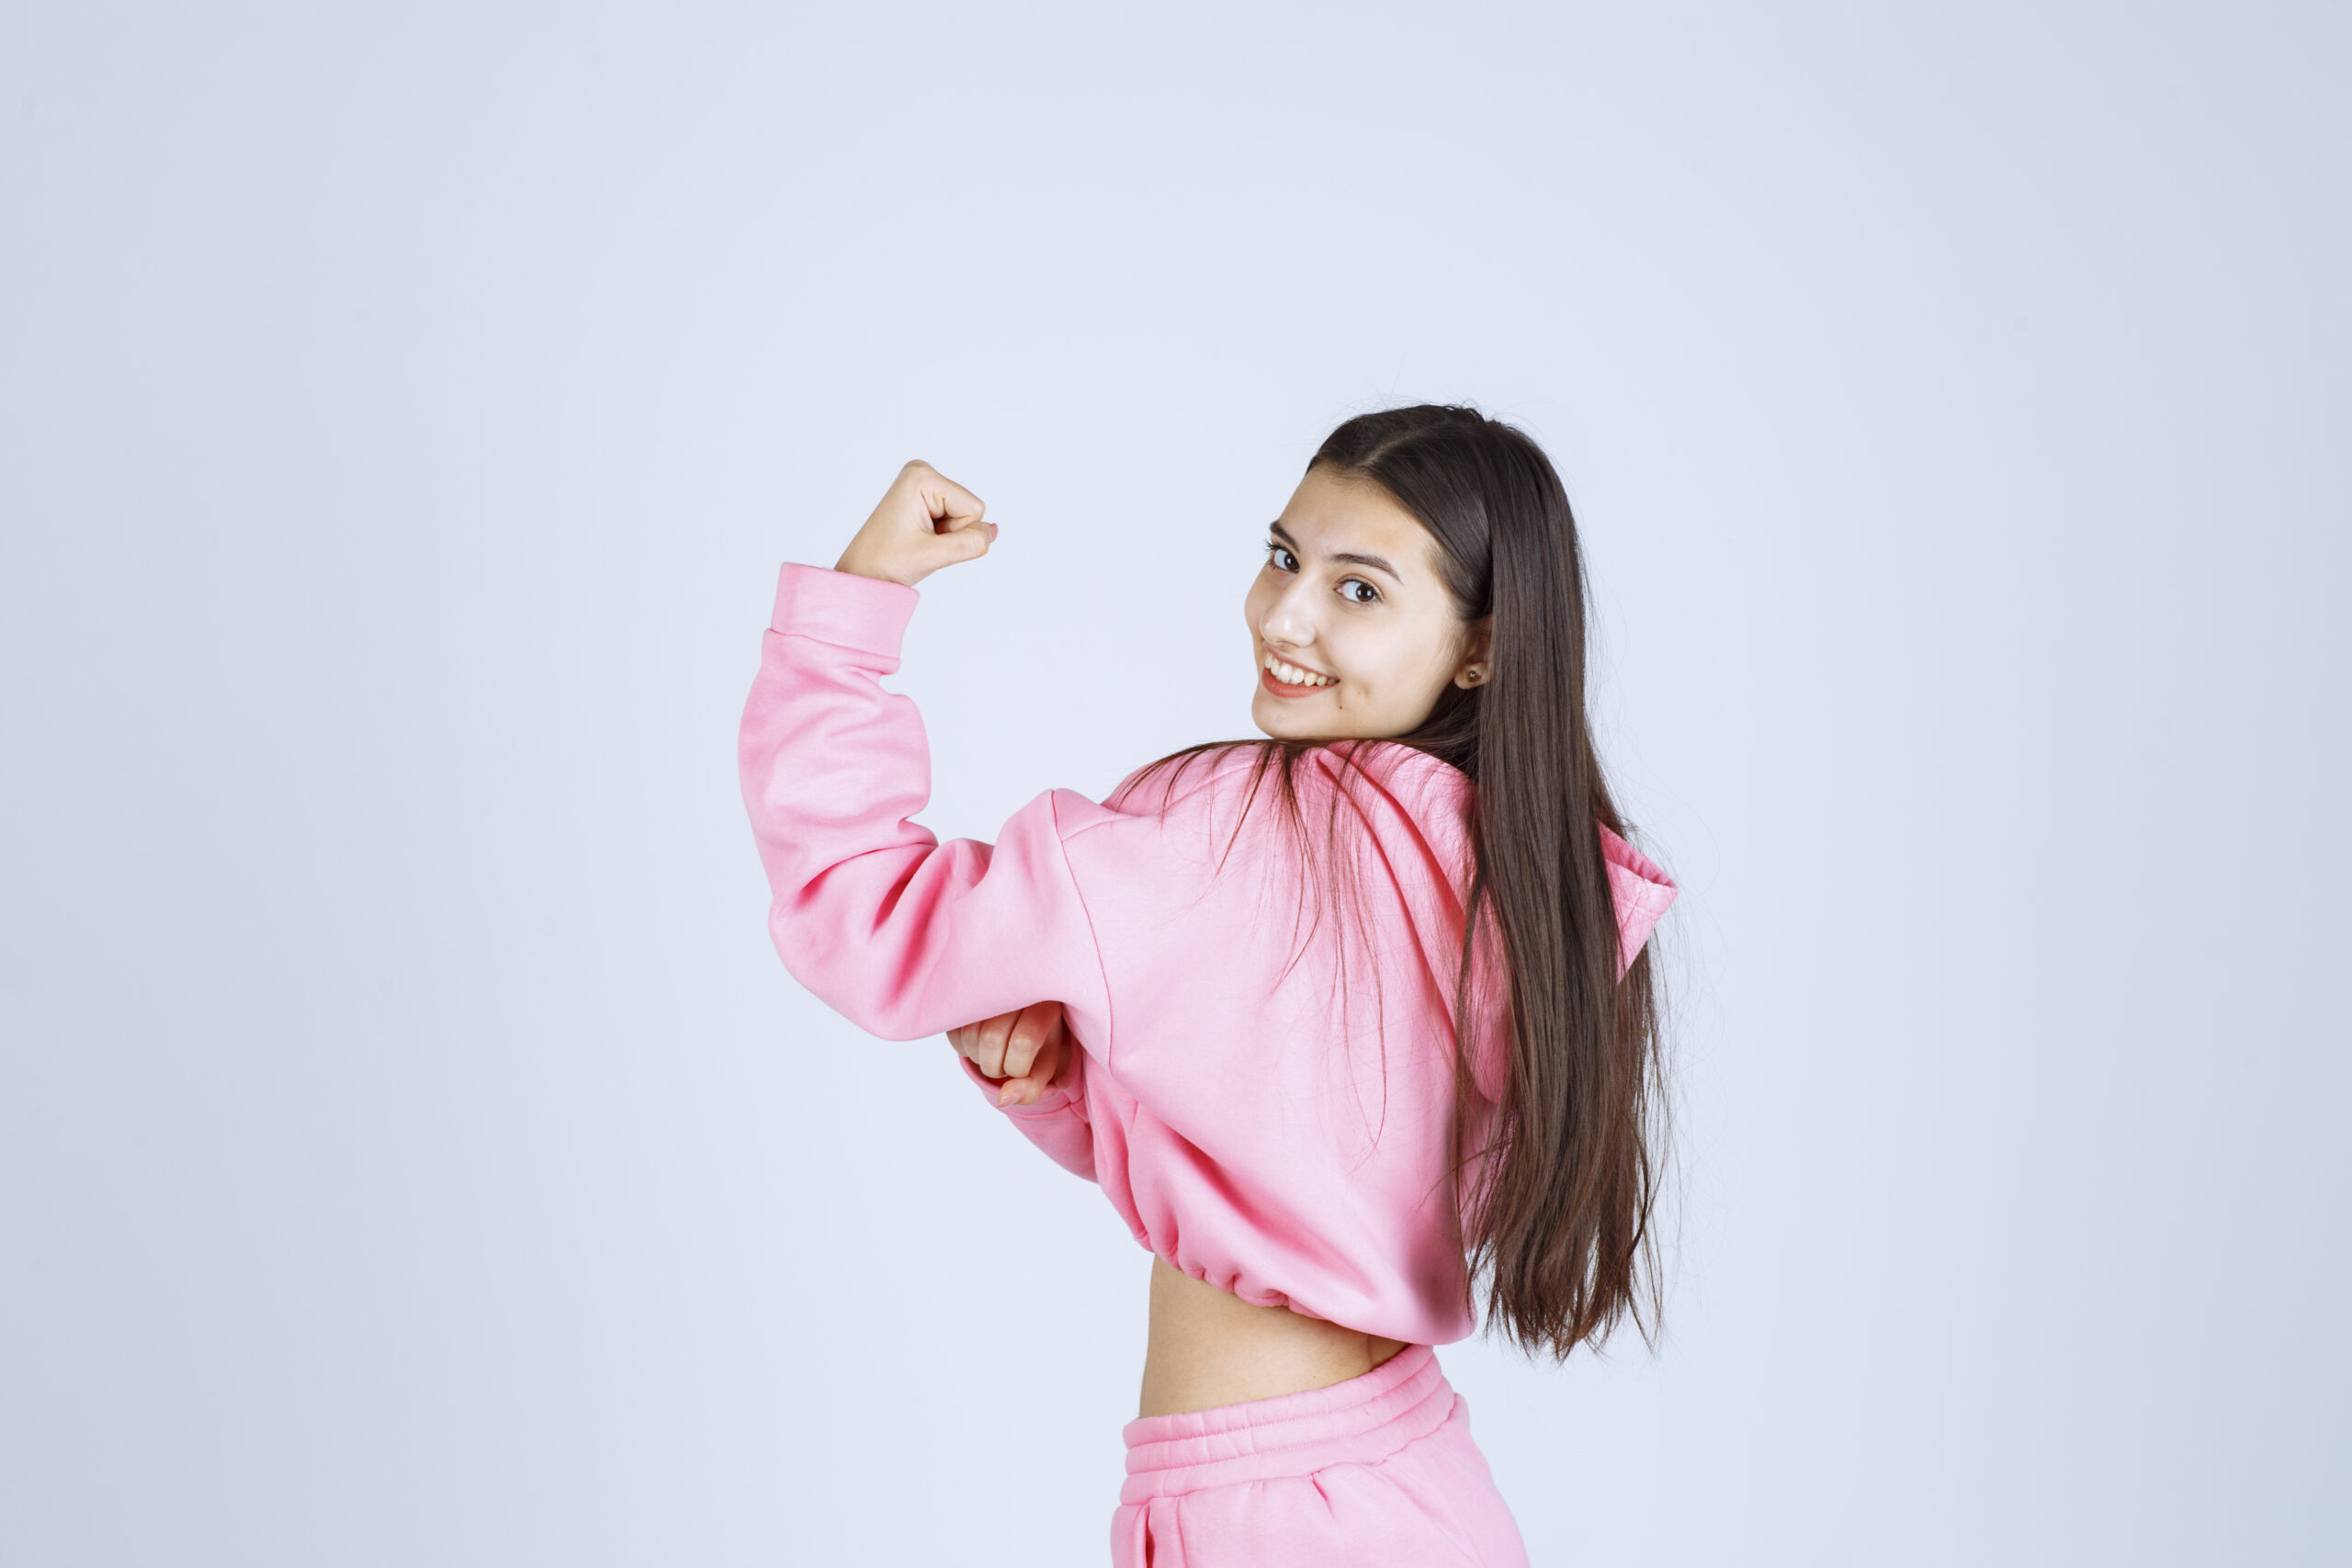 Girl in pink pajamas showing her fist and feeling powerful. High quality photo